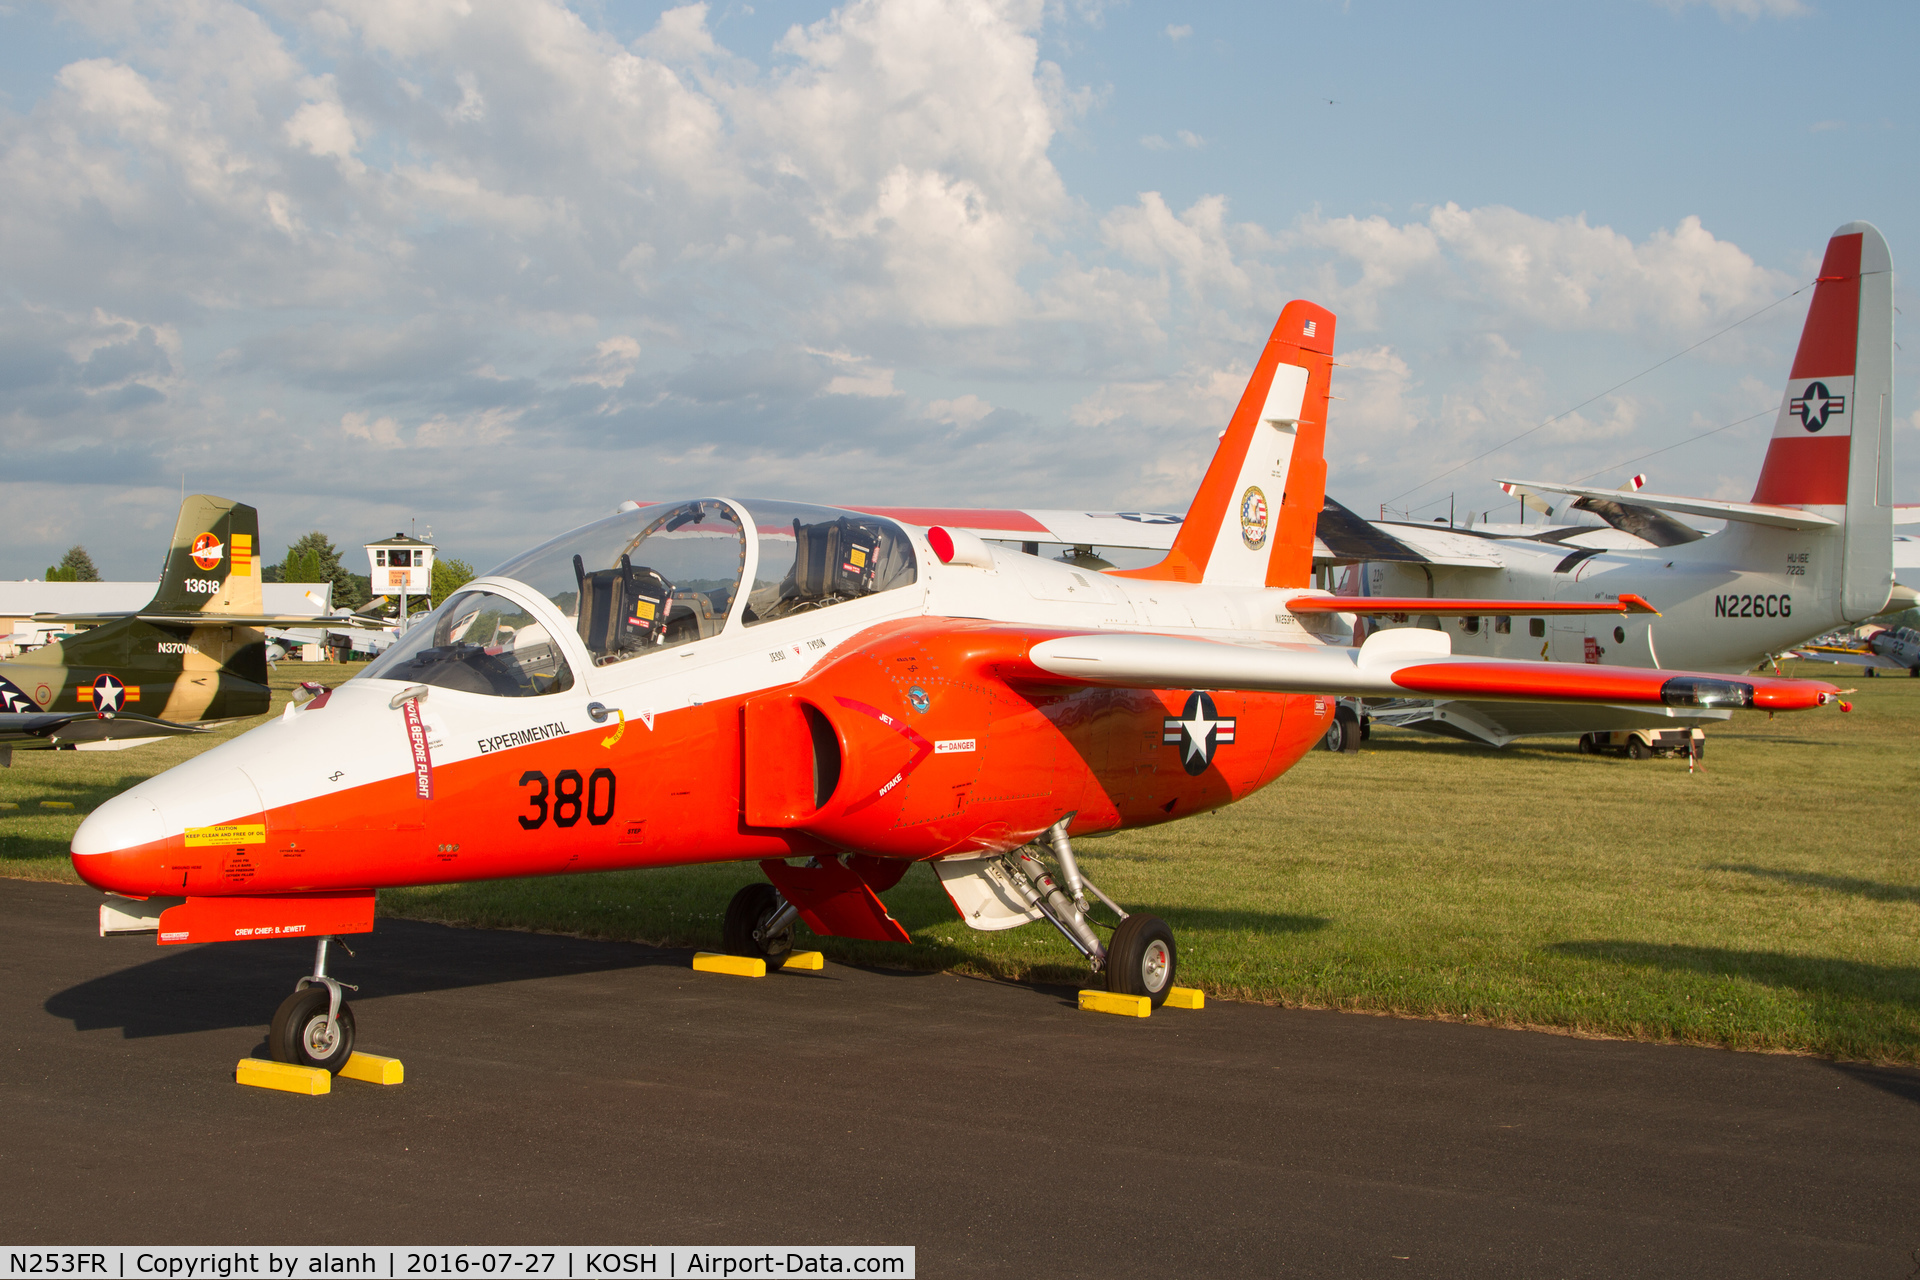 N253FR, 1985 SIAI-Marchetti S-211 C/N 004/02-001, In the warbird park at AirVenture 2016